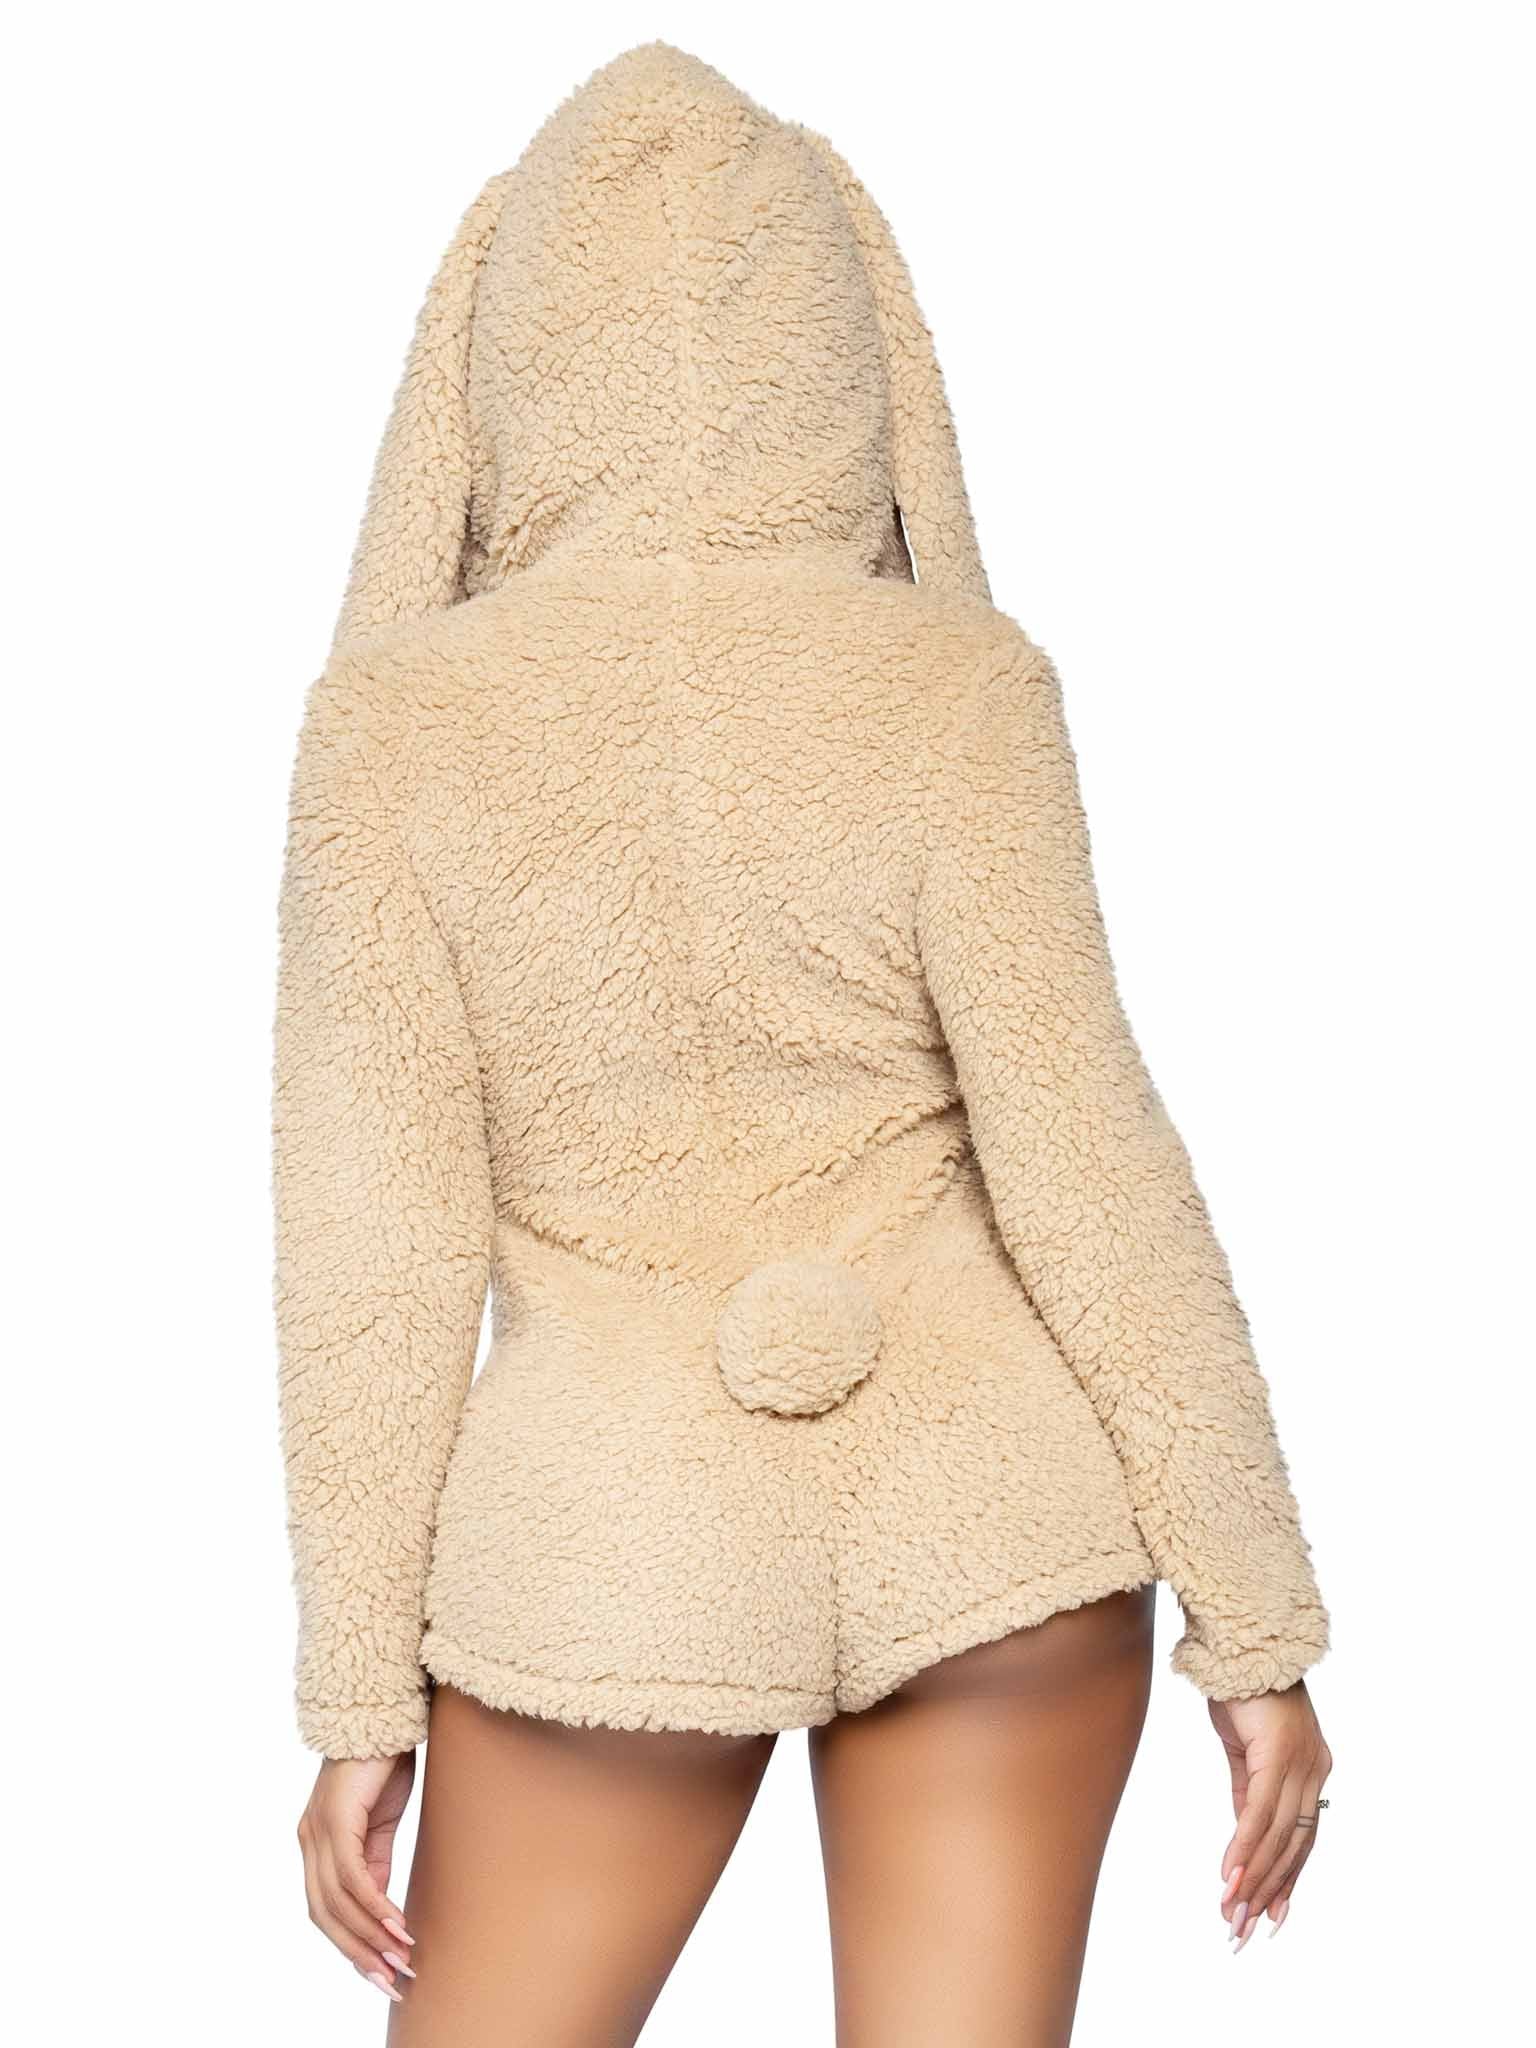 Leg Avenue Cuddle Bunny Ultra Soft Zip Up Teddy Romper - Three Sizes Available!-BestGSpot